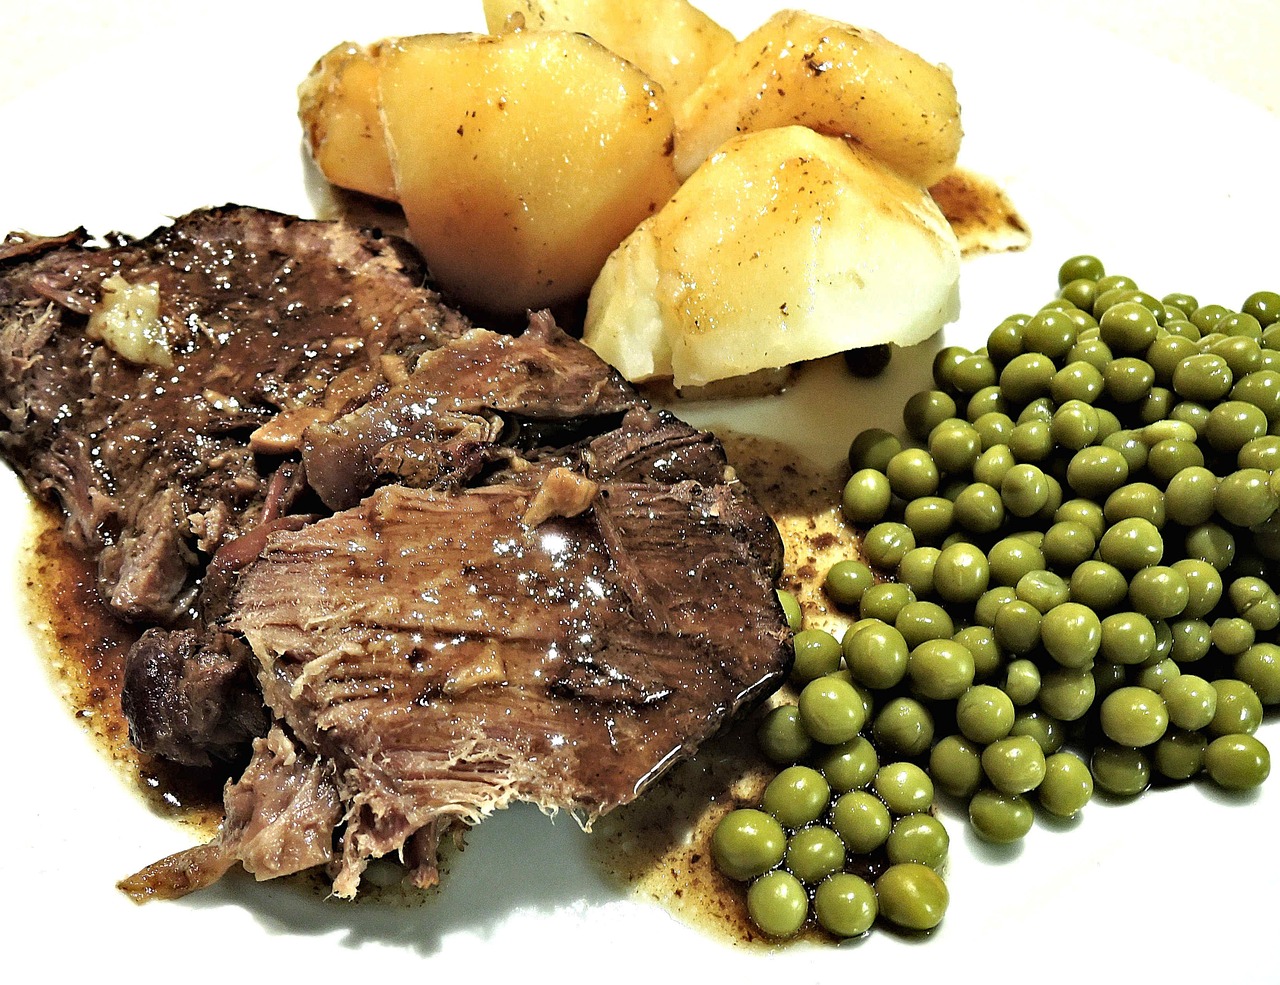 Curried Beef With Potatoes and Peas